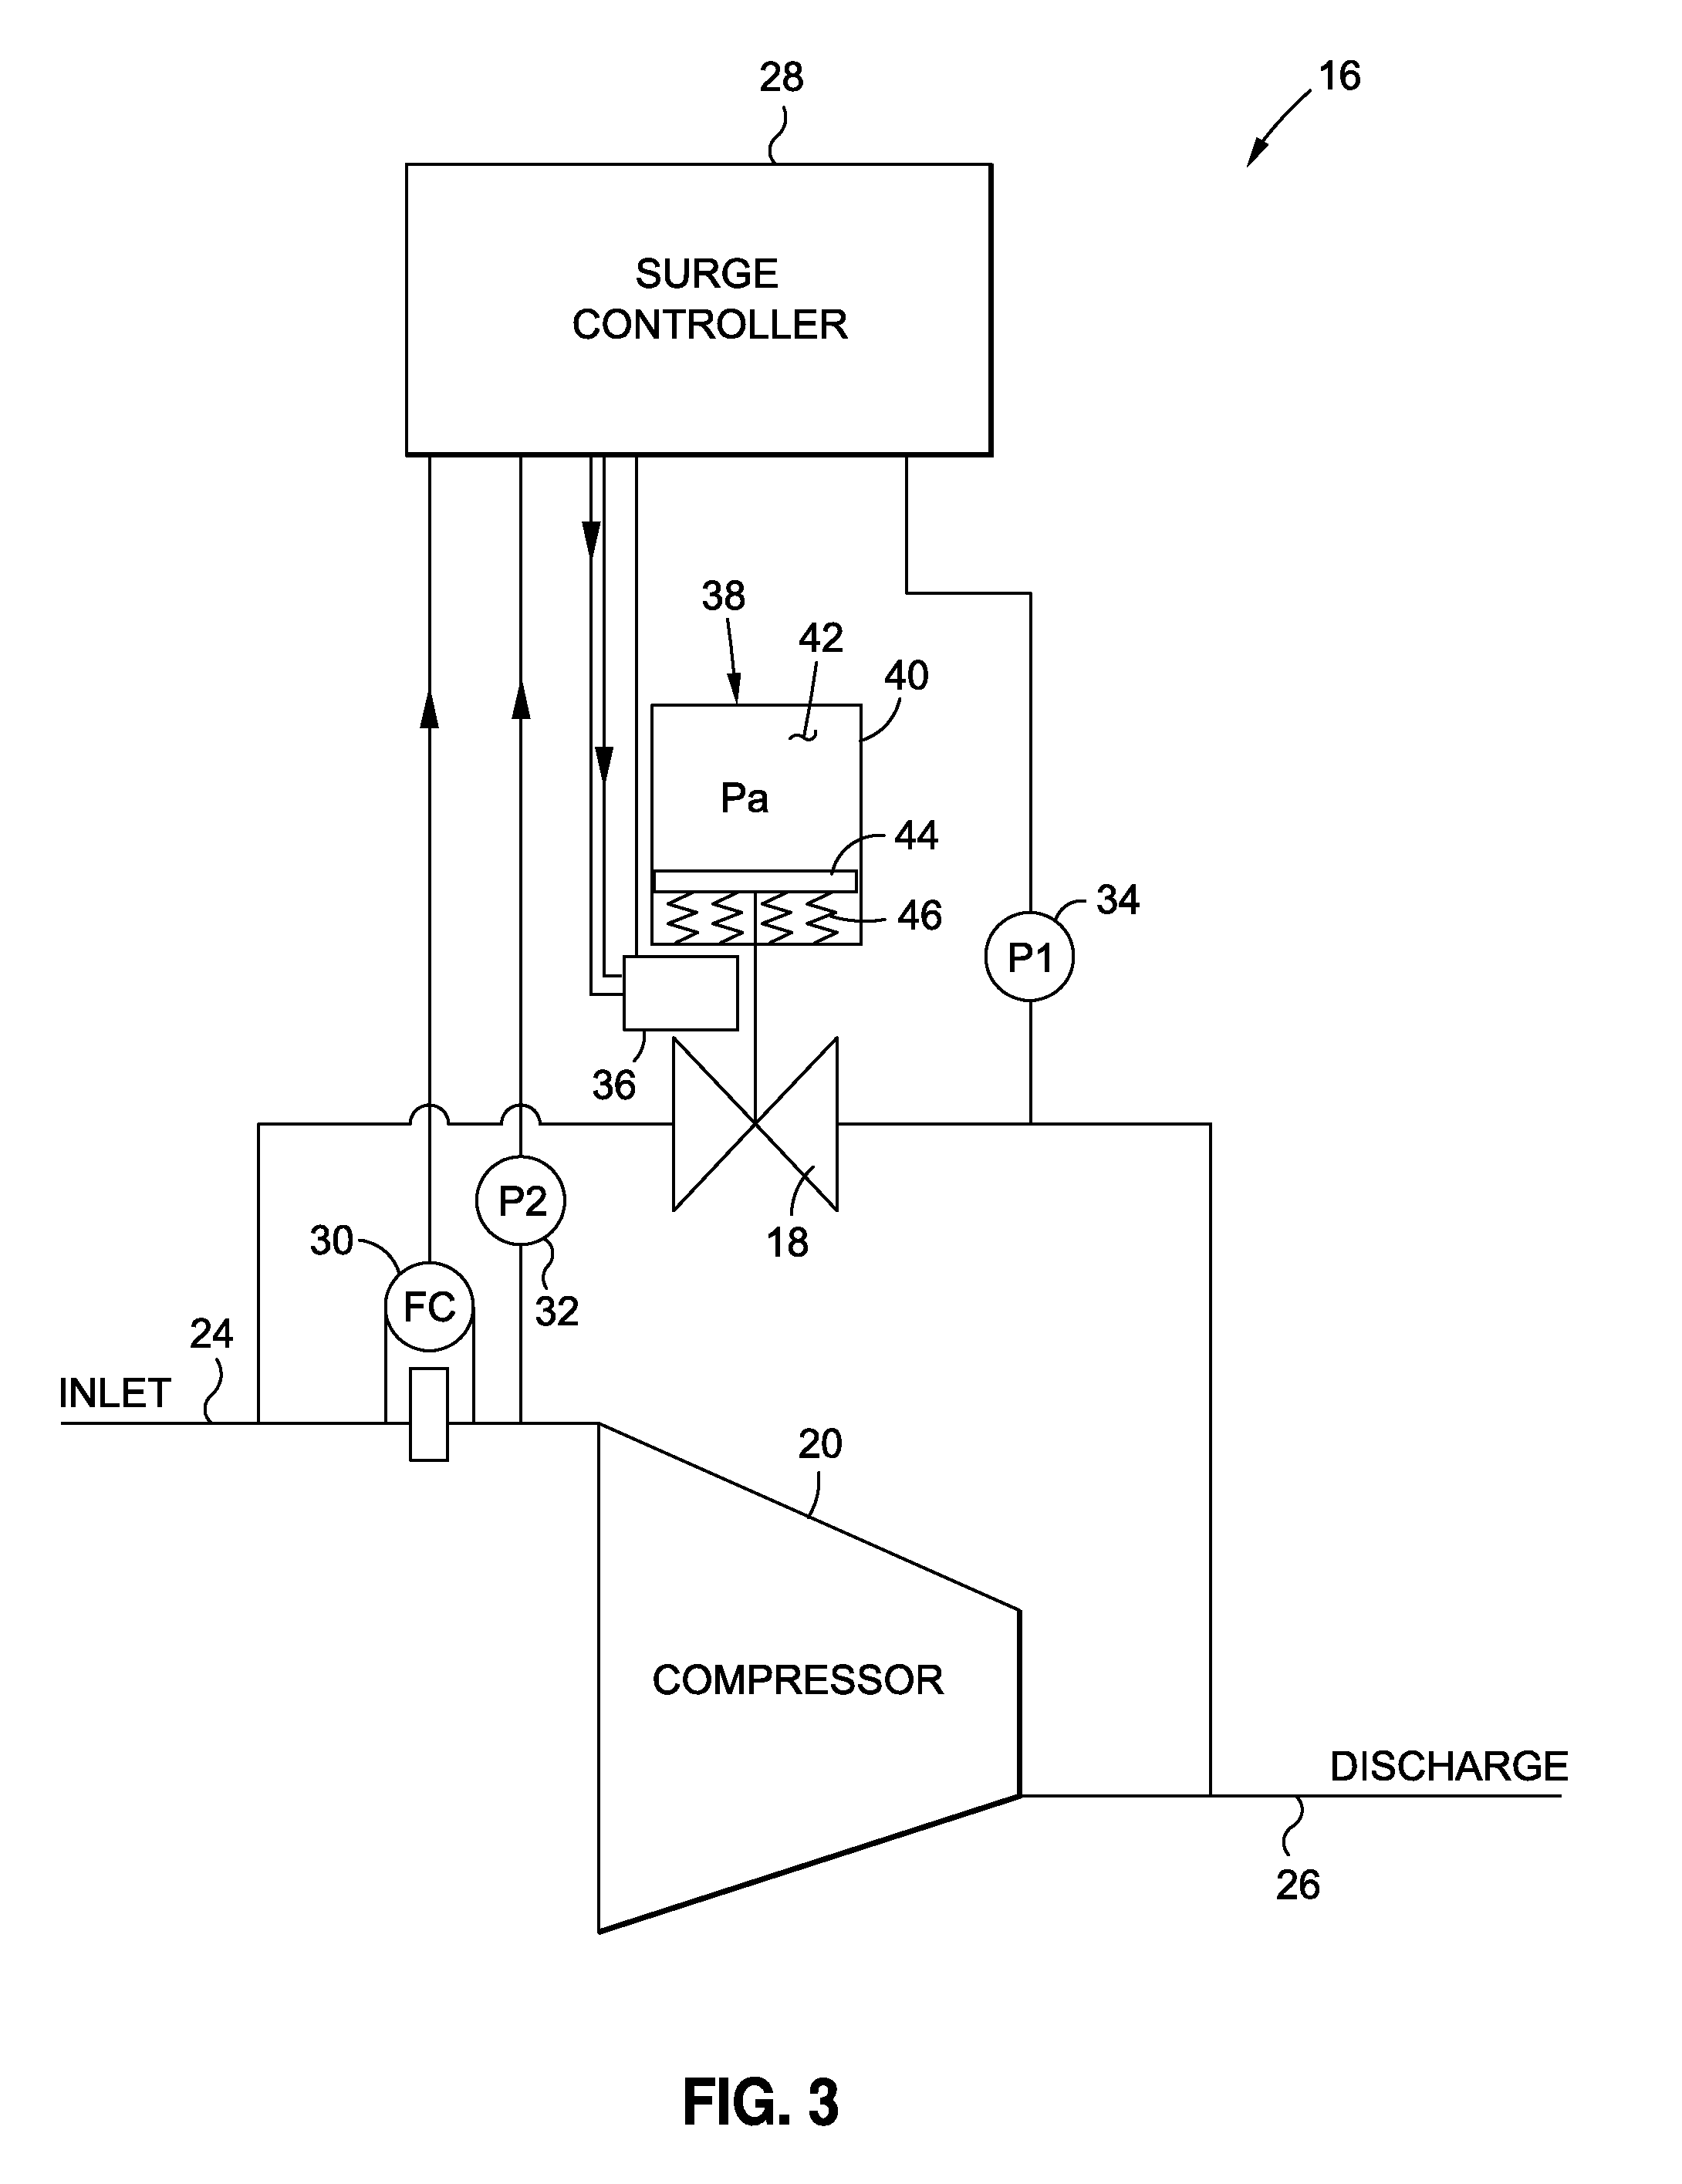 Dead time reducer for piston actuator